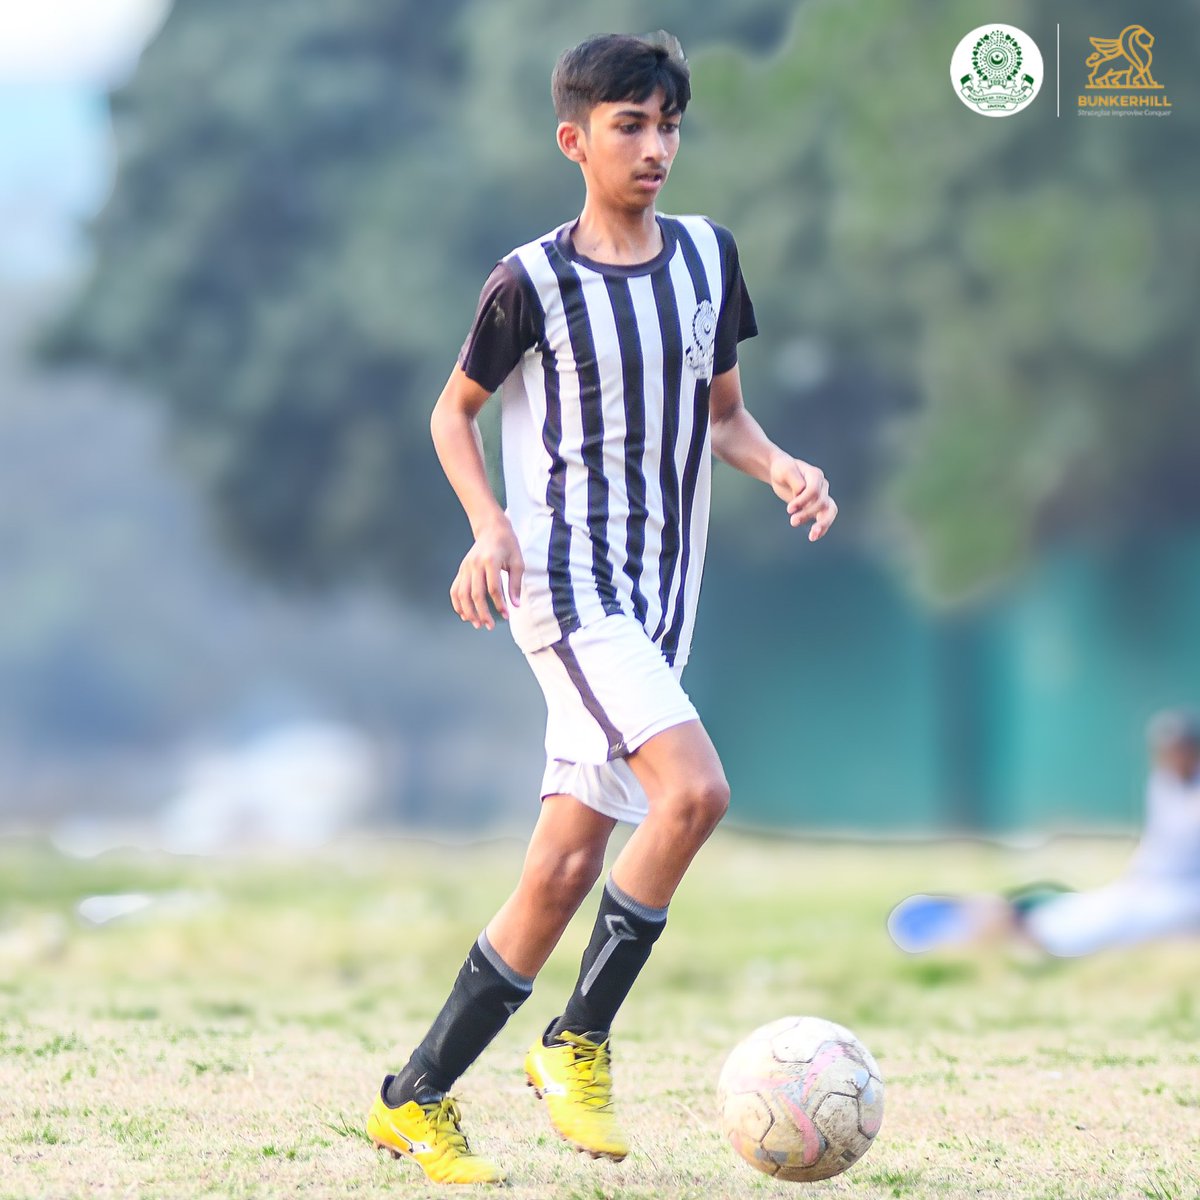 Dreams don't work unless you do. ⚽️💪

Be a part of Kolkata’s 132 year old legacy. ⚽

Join Now❗

📍Mohammedan Sporting Club
🗓 Every Friday, Saturday, Sunday

📲 For more details, contact +91 74396 99224

#JaanJaanMohammedan 💪🏼#BlackAndWhiteBrigade 🤍🖤 #IndianFootball ⚽